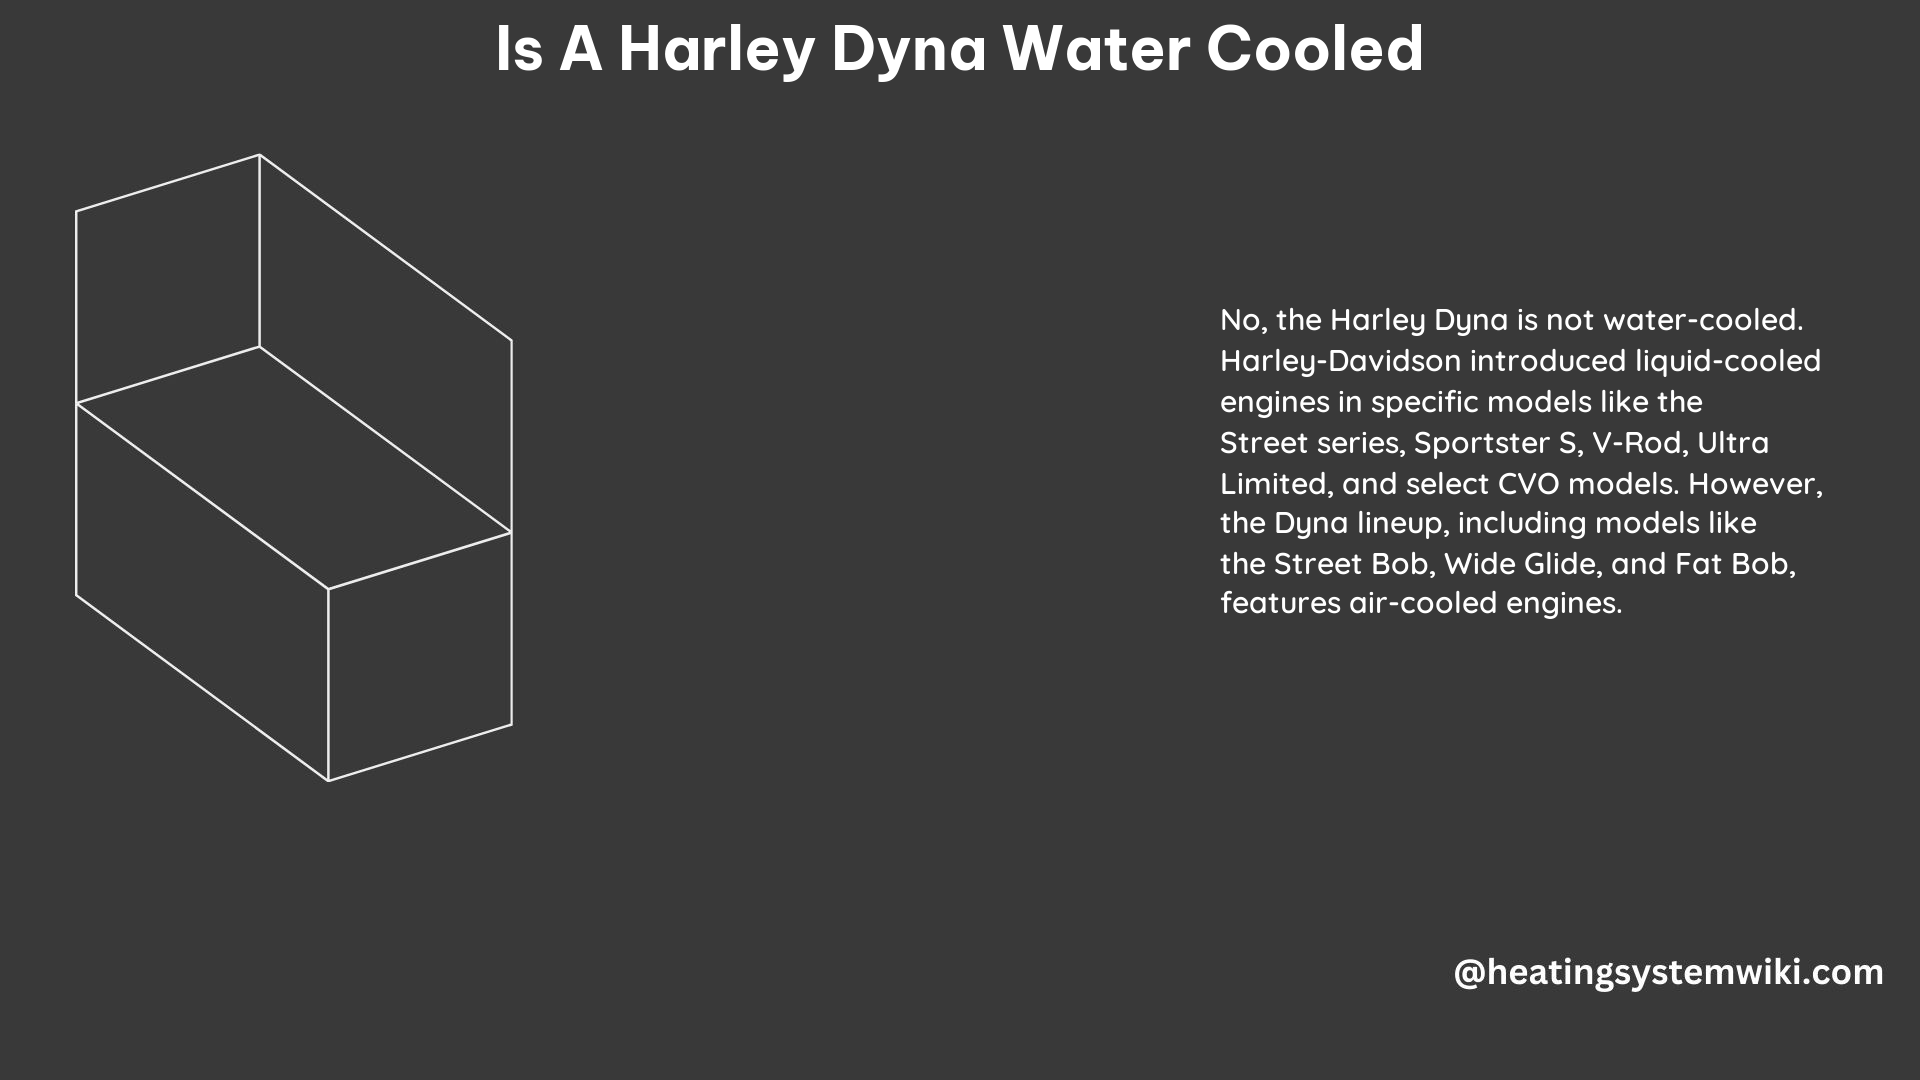 Is a Harley Dyna Water Cooled